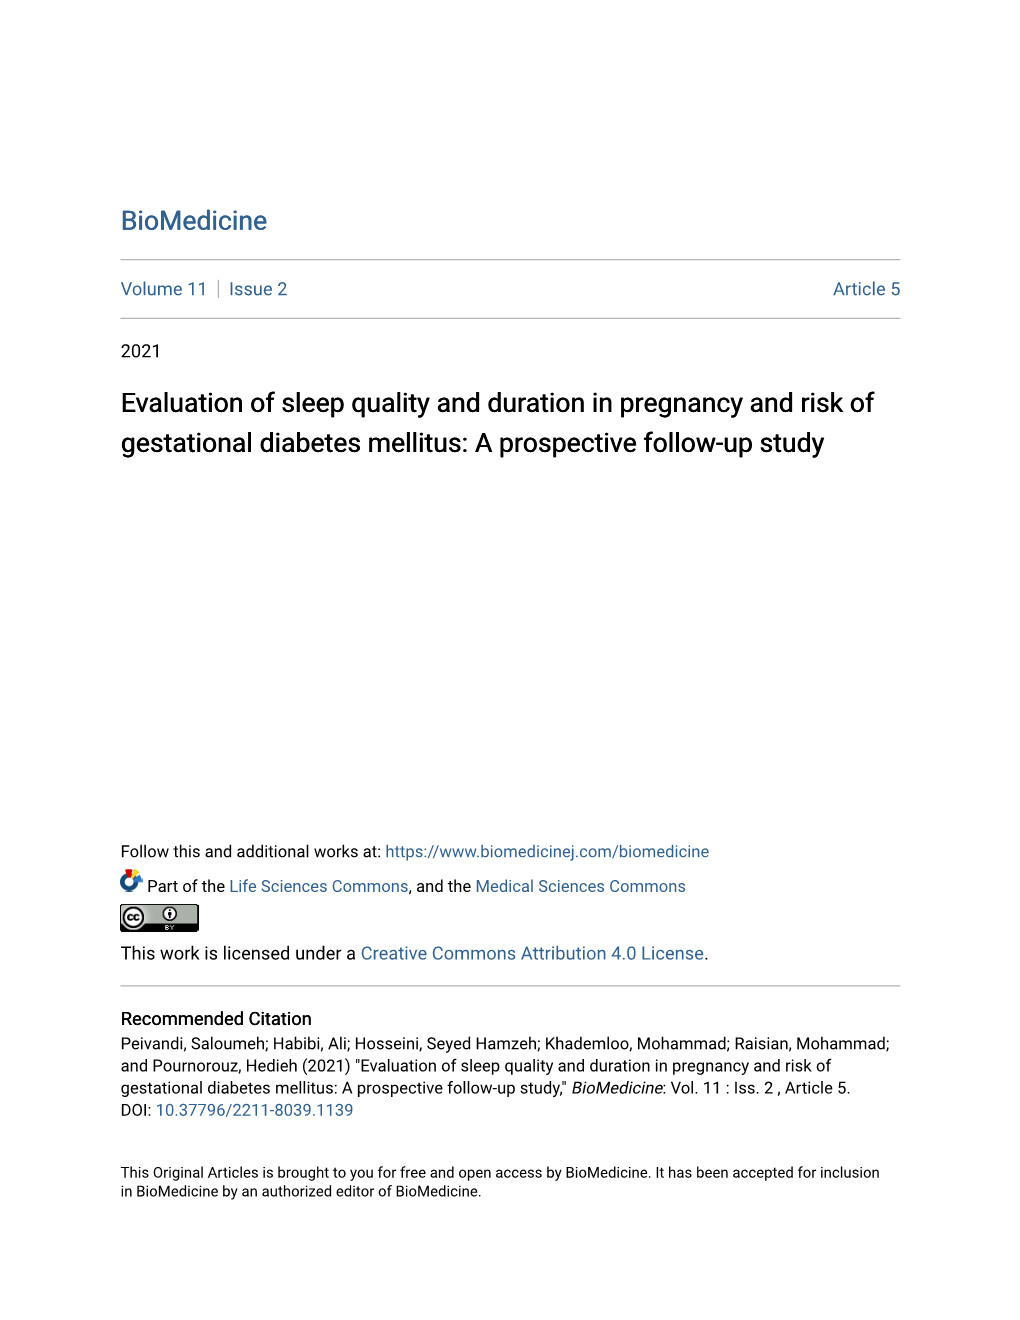 Evaluation of Sleep Quality and Duration in Pregnancy and Risk of Gestational Diabetes Mellitus: a Prospective Follow-Up Study